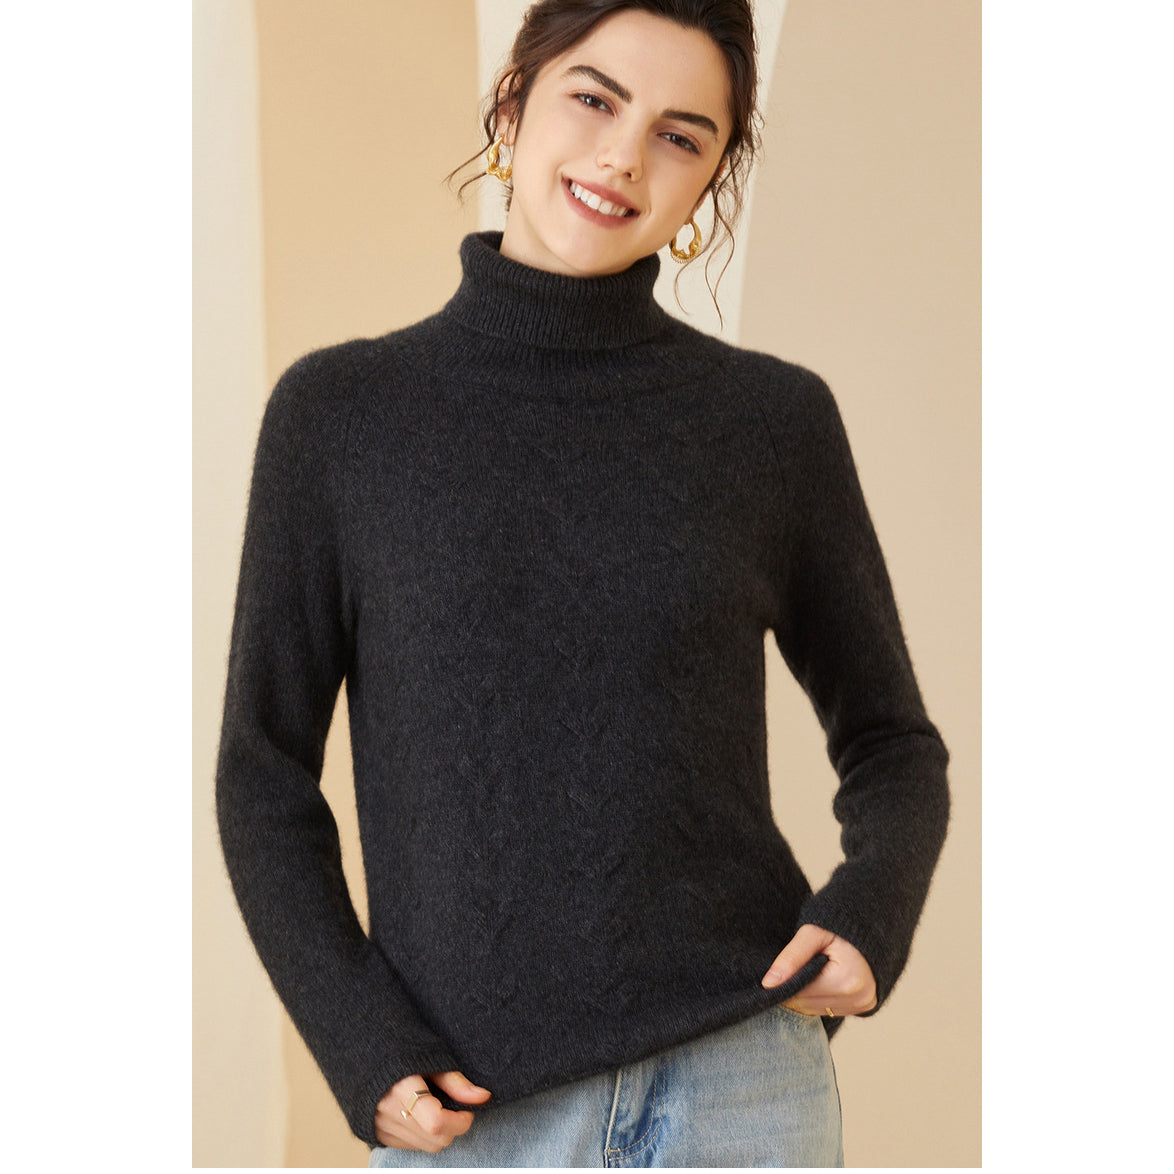 Women's Pure Pullover Turtleneck Cashmere Sweater Long Sleeve Warm Cashmere Tops